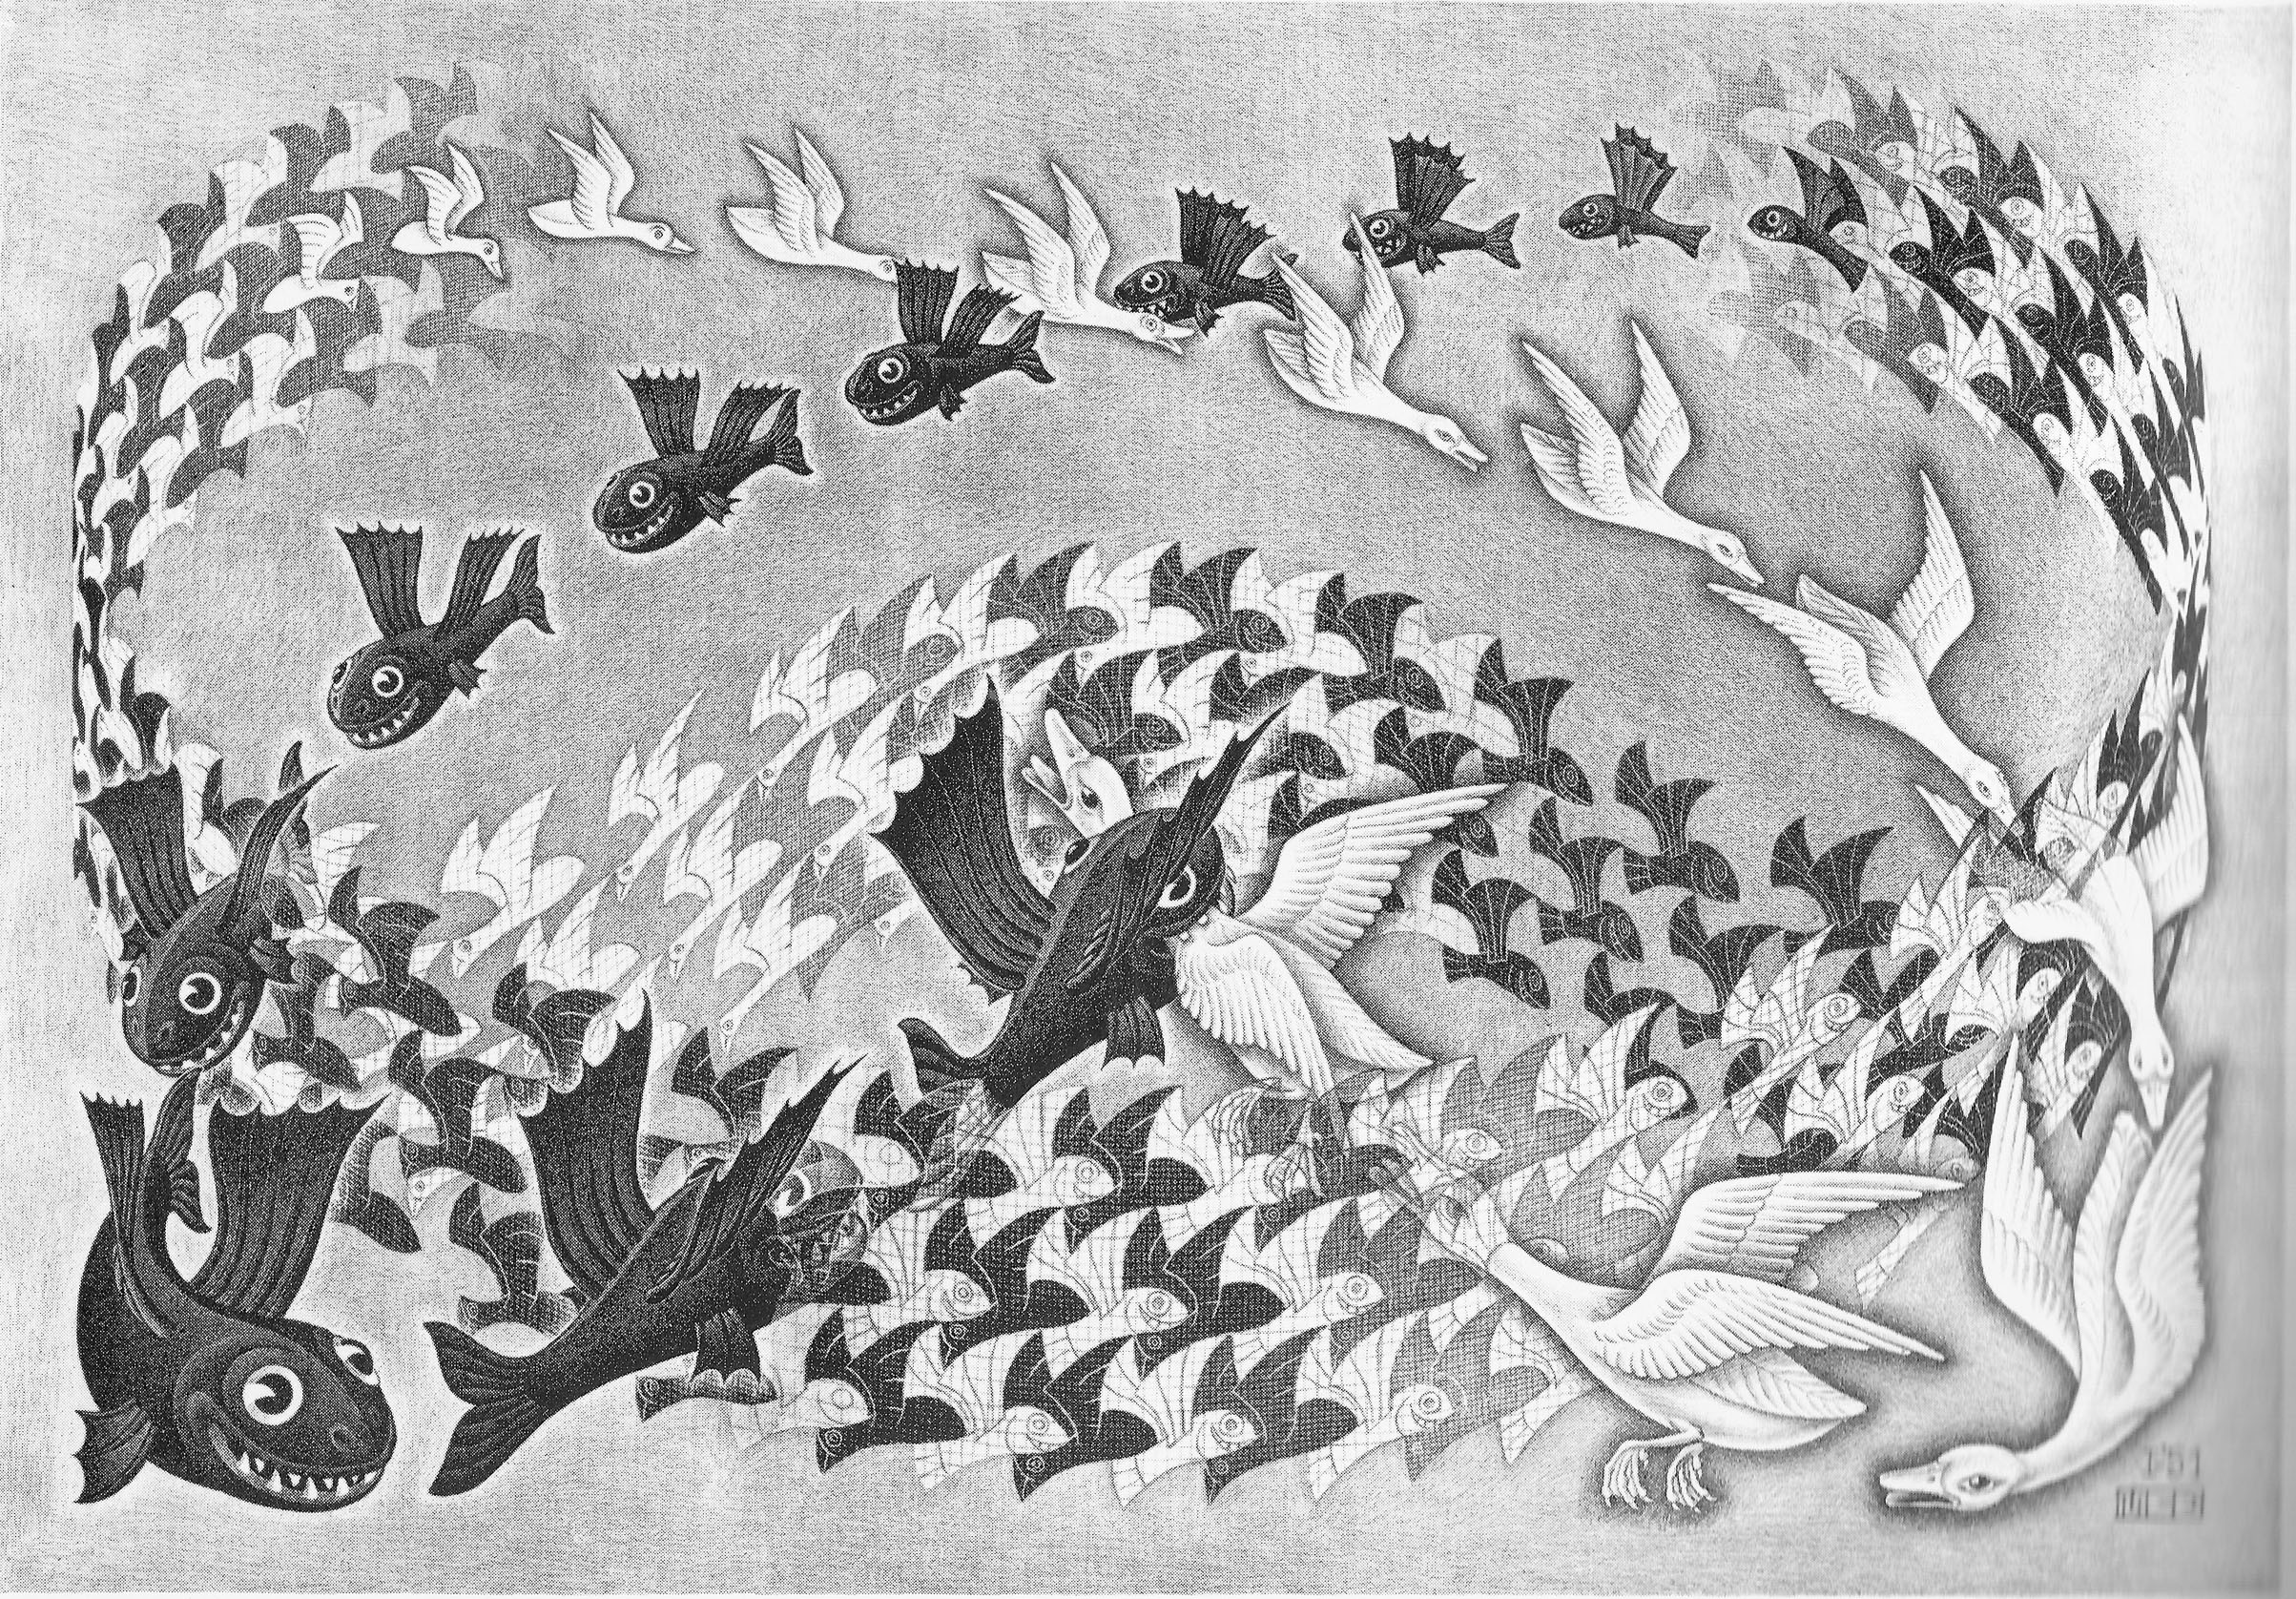 artwork, M. C. Escher, Monochrome, Psychedelic, Animals, Fish, Birds, Geese, Flying, Lithograph Wallpaper